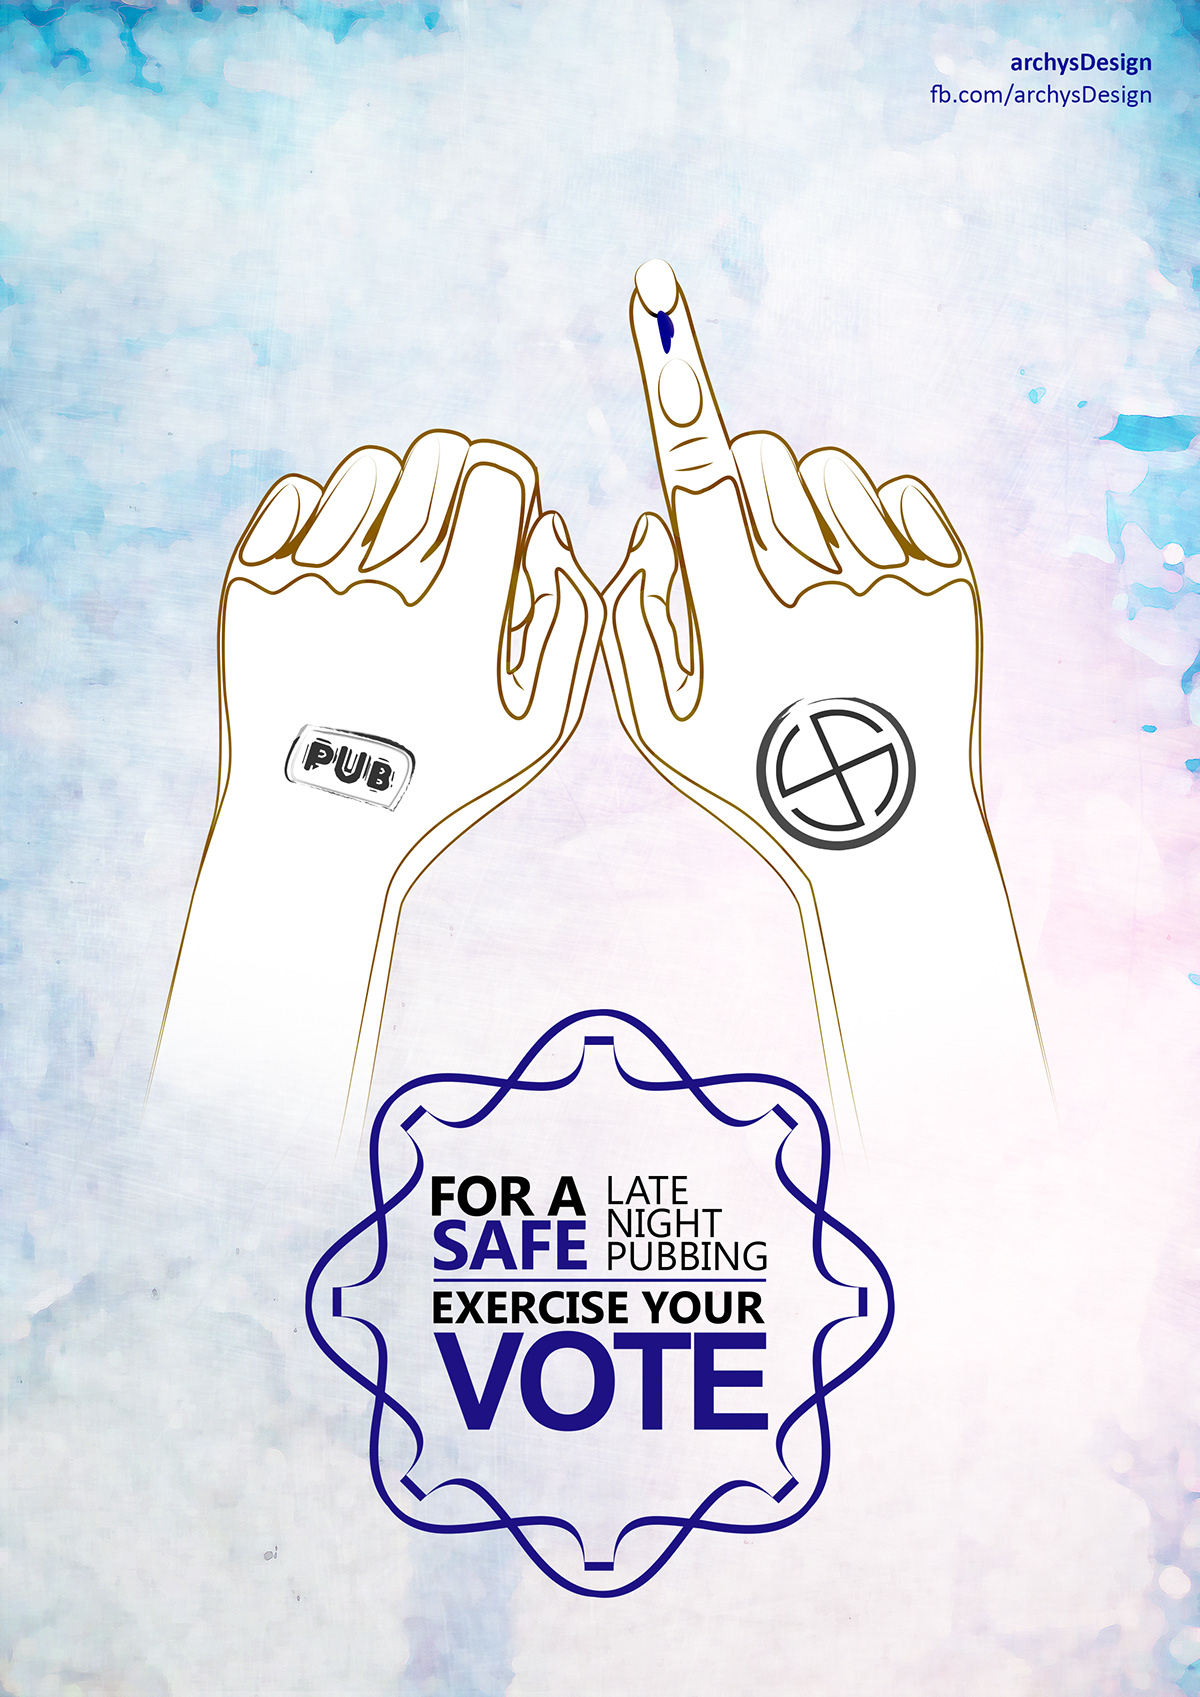 vote Election Indian Politics Power Of 49 women empower dignity safety freedom